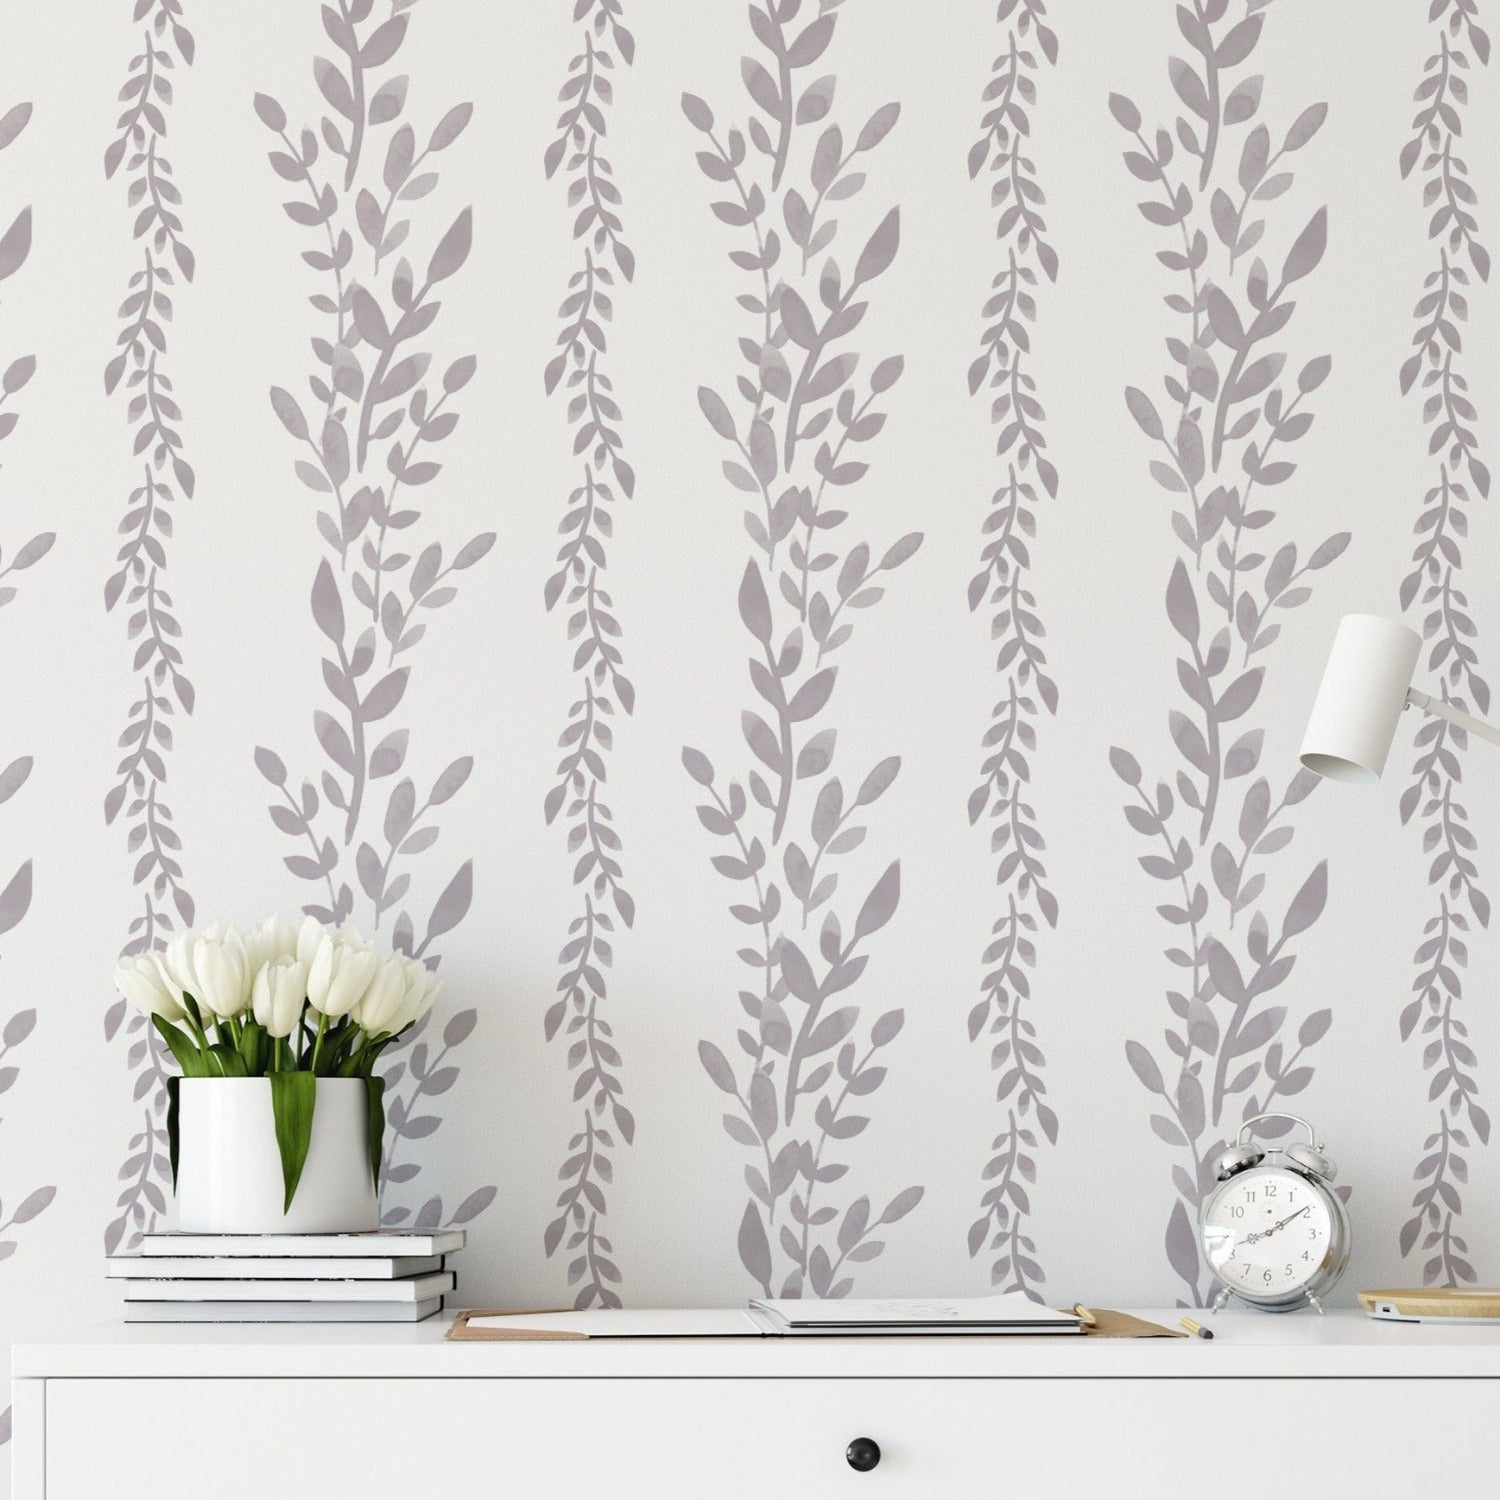 Decorative setting displaying Classic Floral Wallpaper with a bouquet of white tulips on a desk, enhancing the room’s aesthetic with its gentle gray floral patterns on a crisp white background.